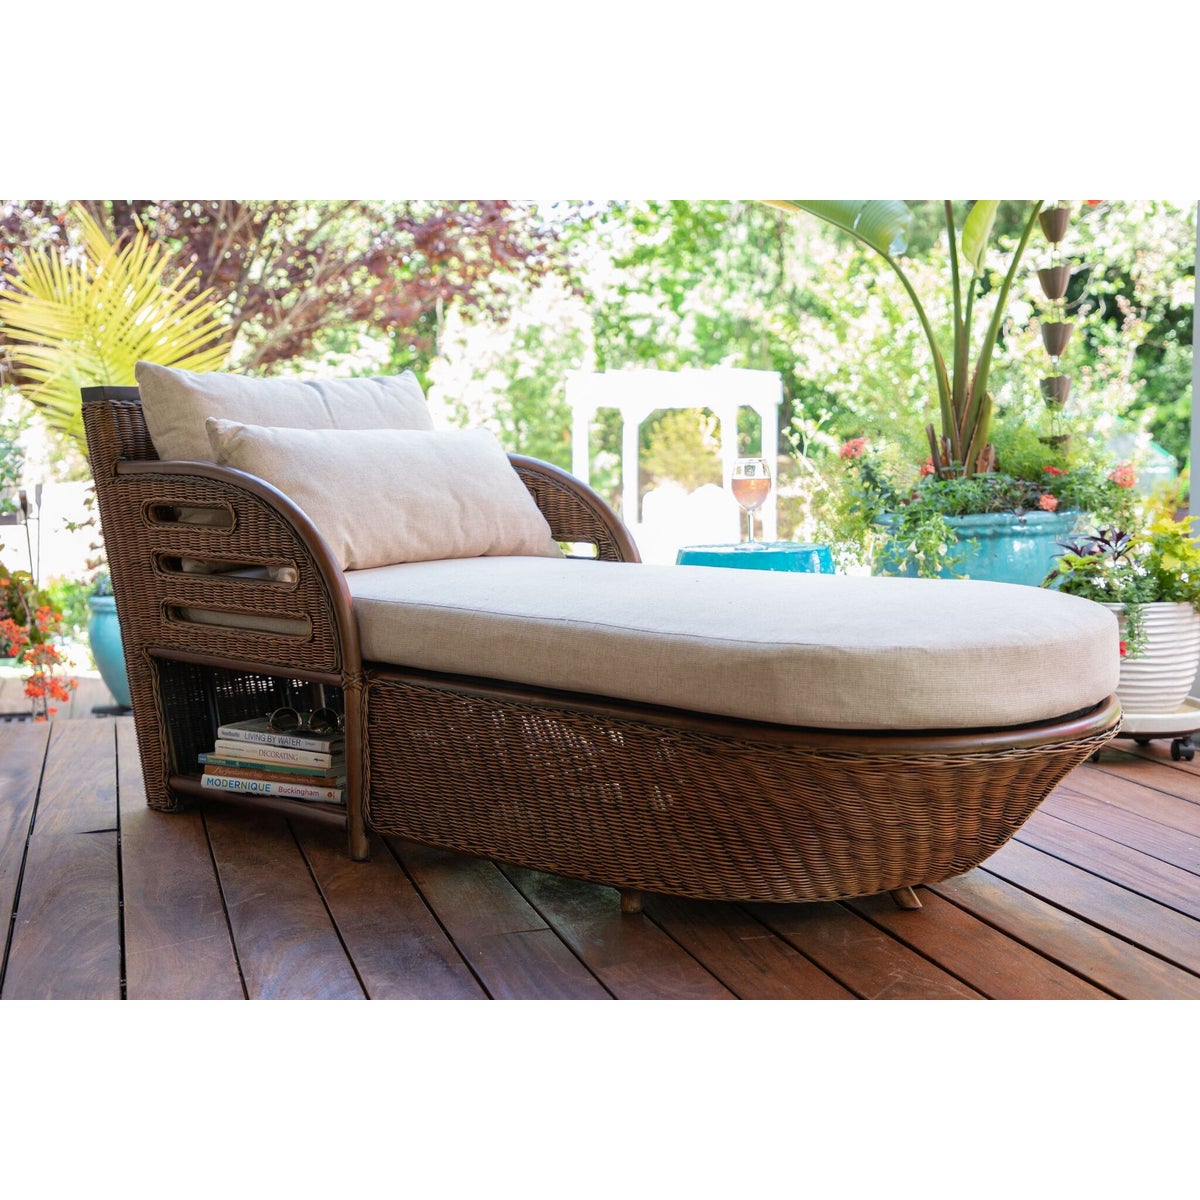 CLOSE-OUT!!Captains Chaise Frame Color - Ginger Cushion Color - Cream Jarrett Bay Collection